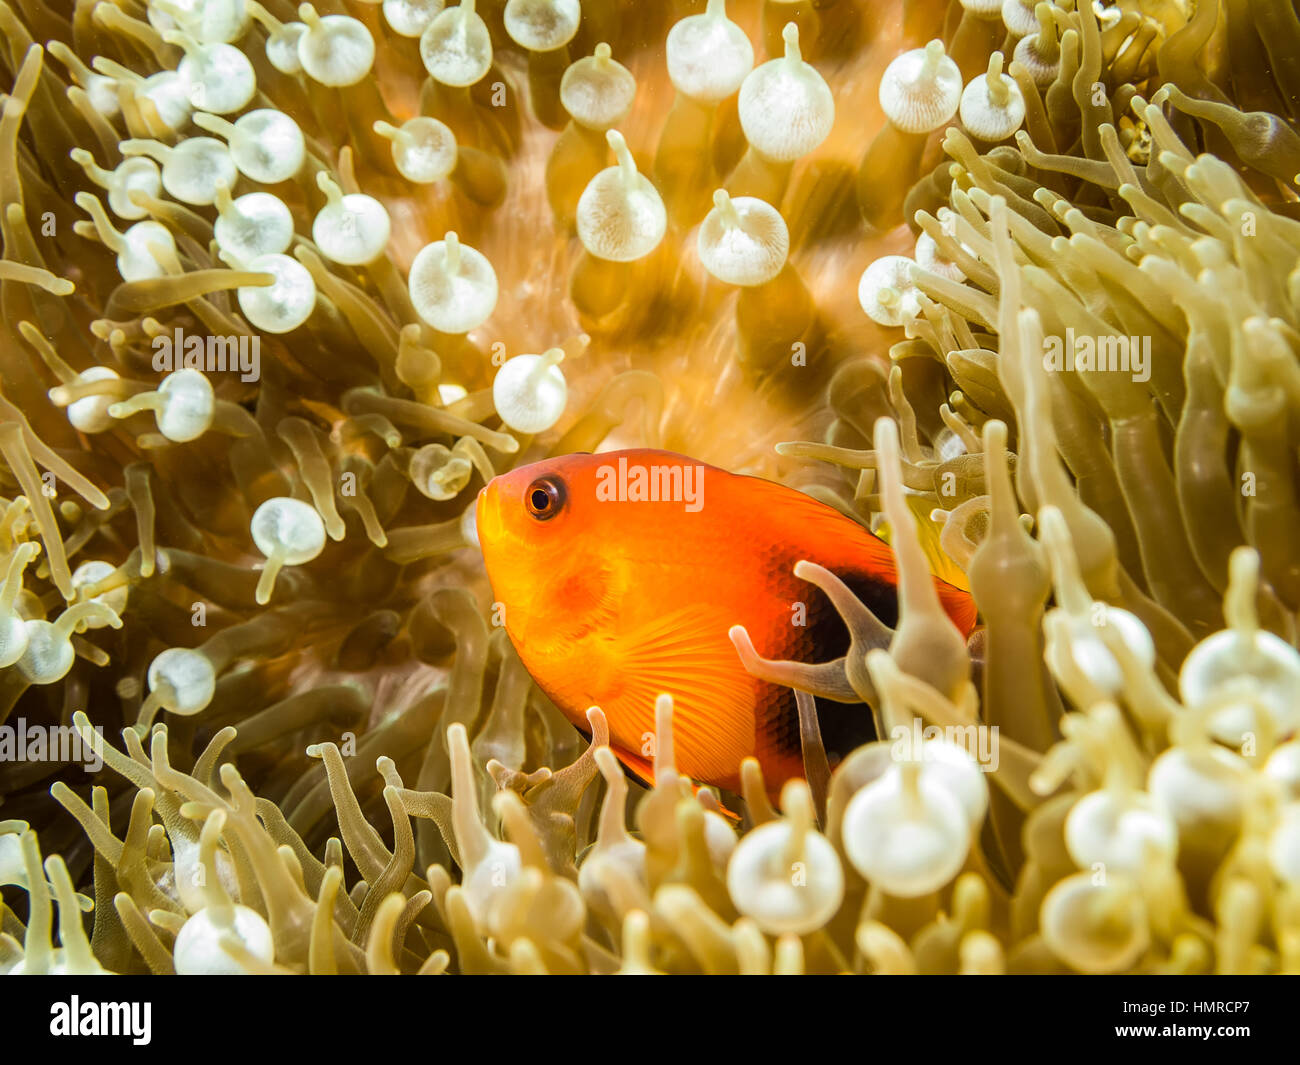 Underwater picture of Red saddleback anemonefish in the Anemone Stock Photo